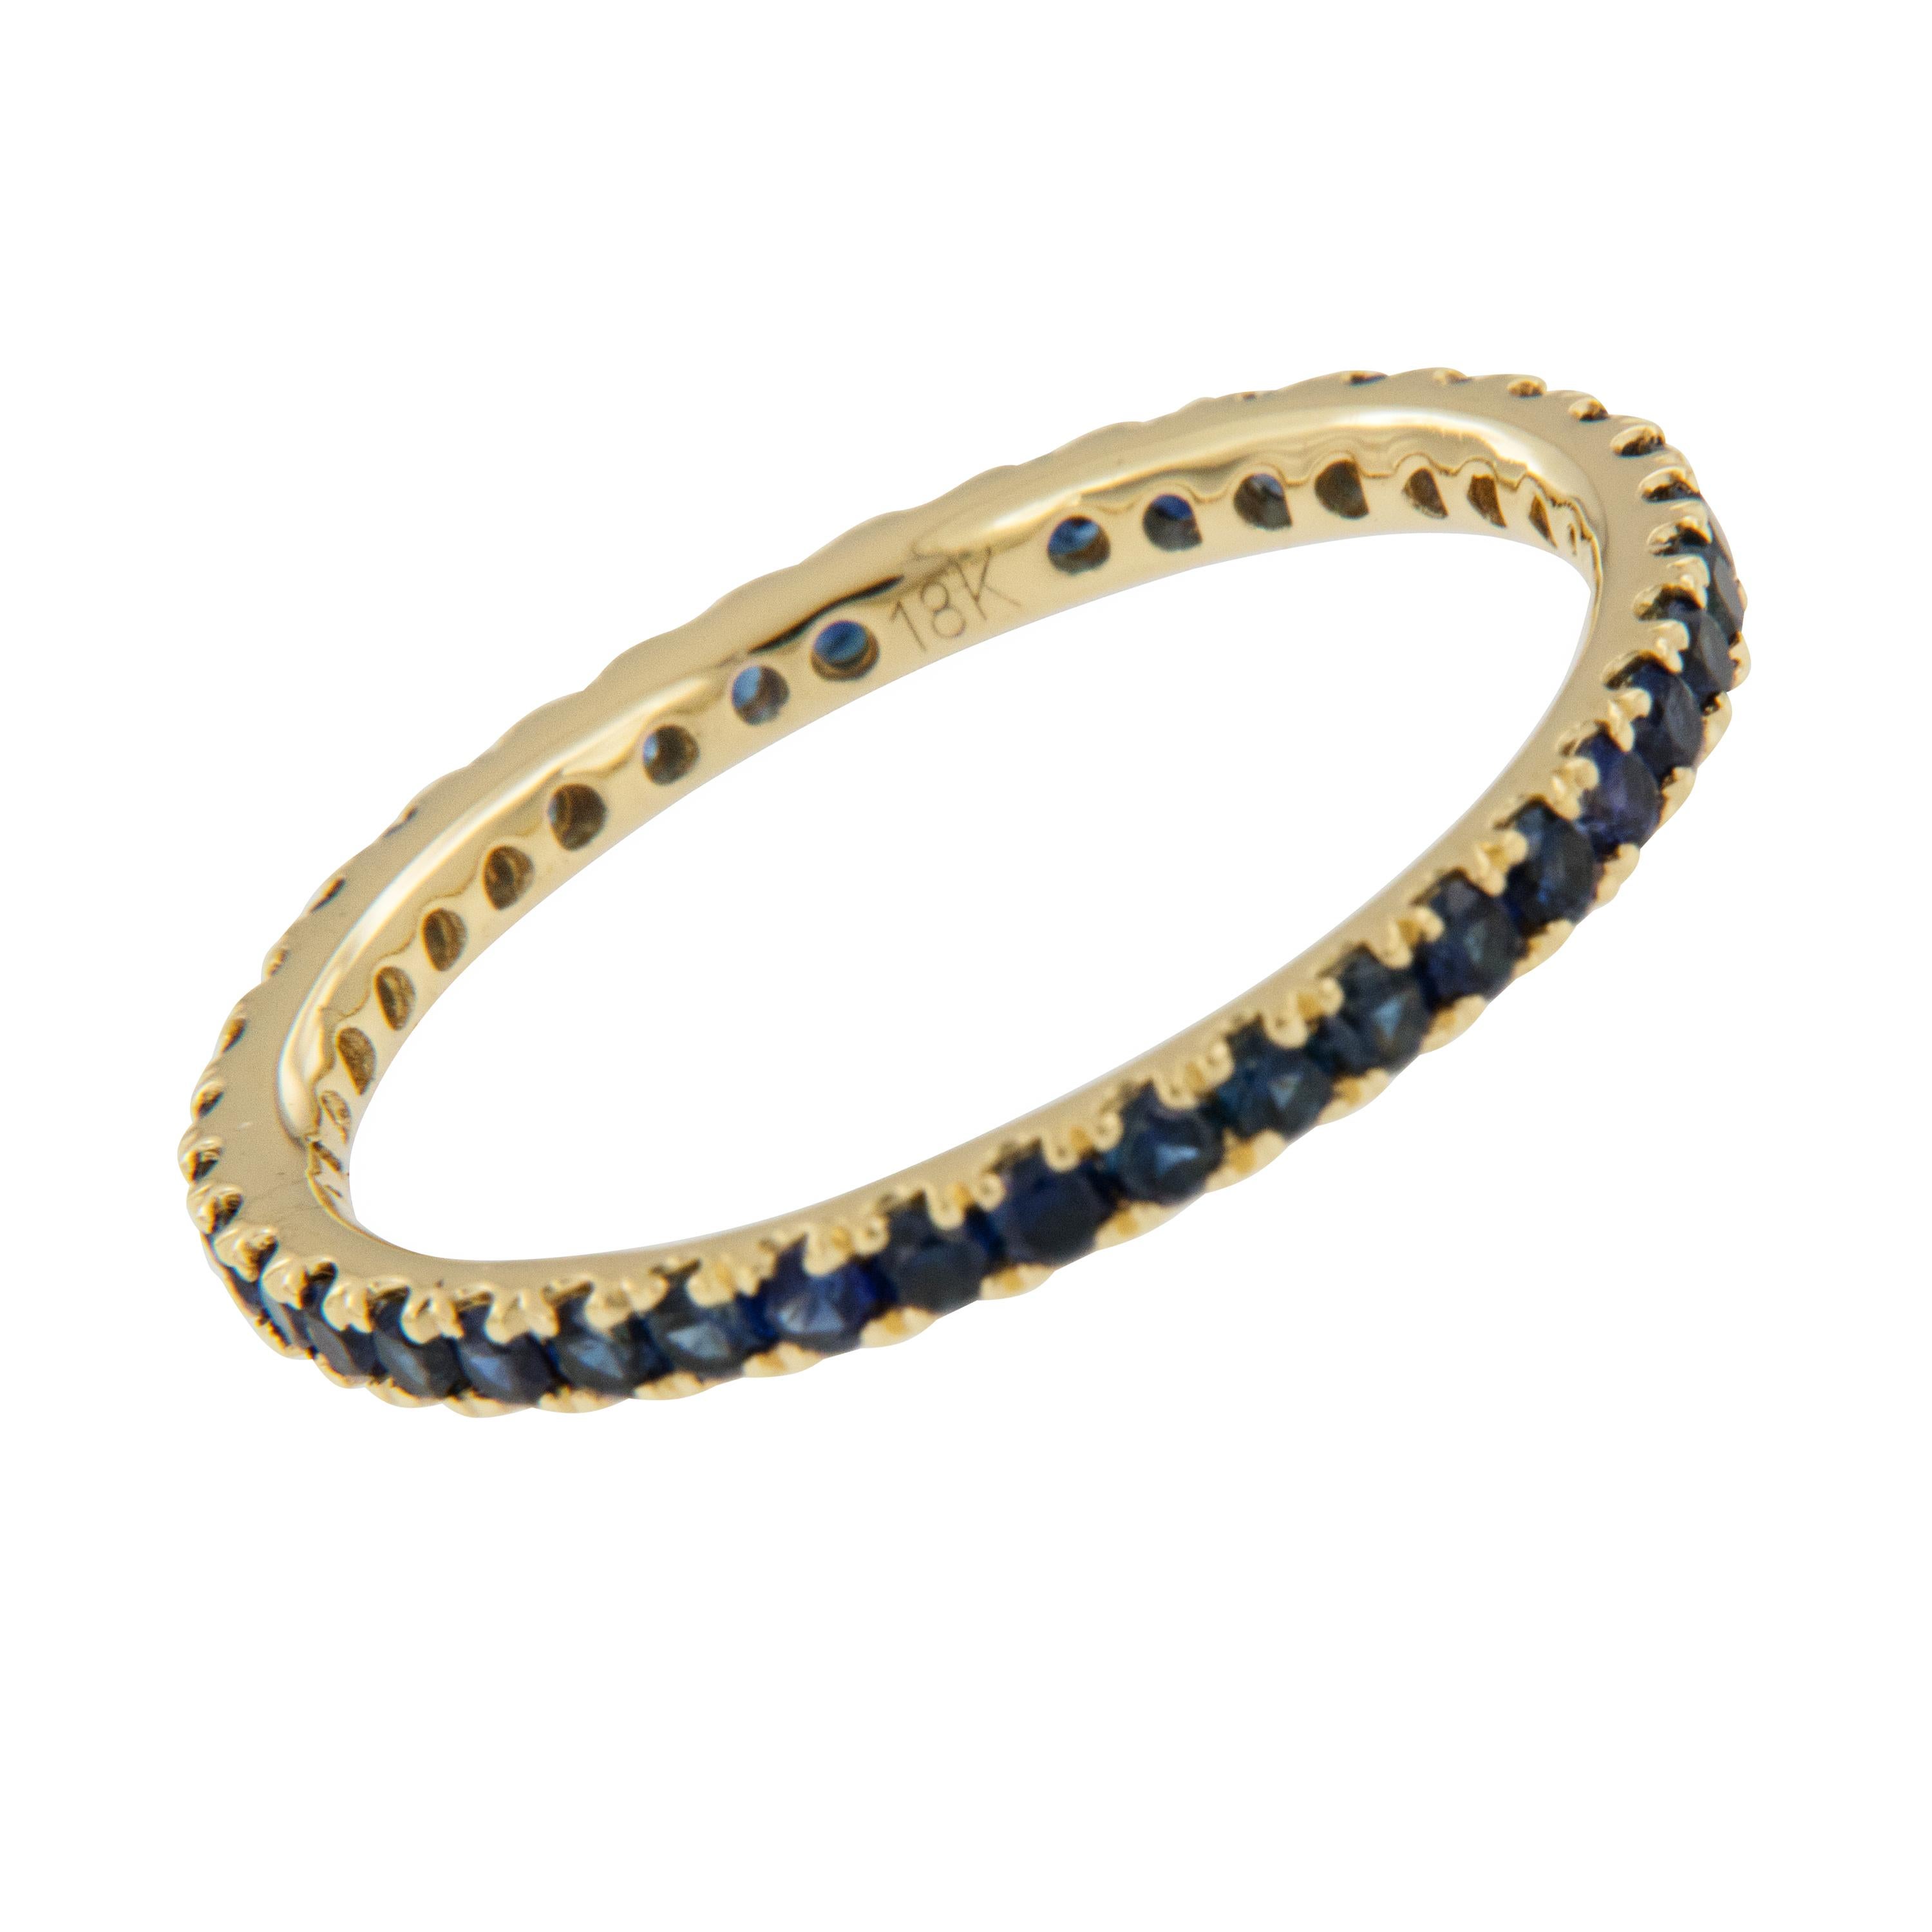 Round Cut 18 Karat Yellow Gold 0.78 Cttw. Blue Sapphire Eternity Band Ring For Sale